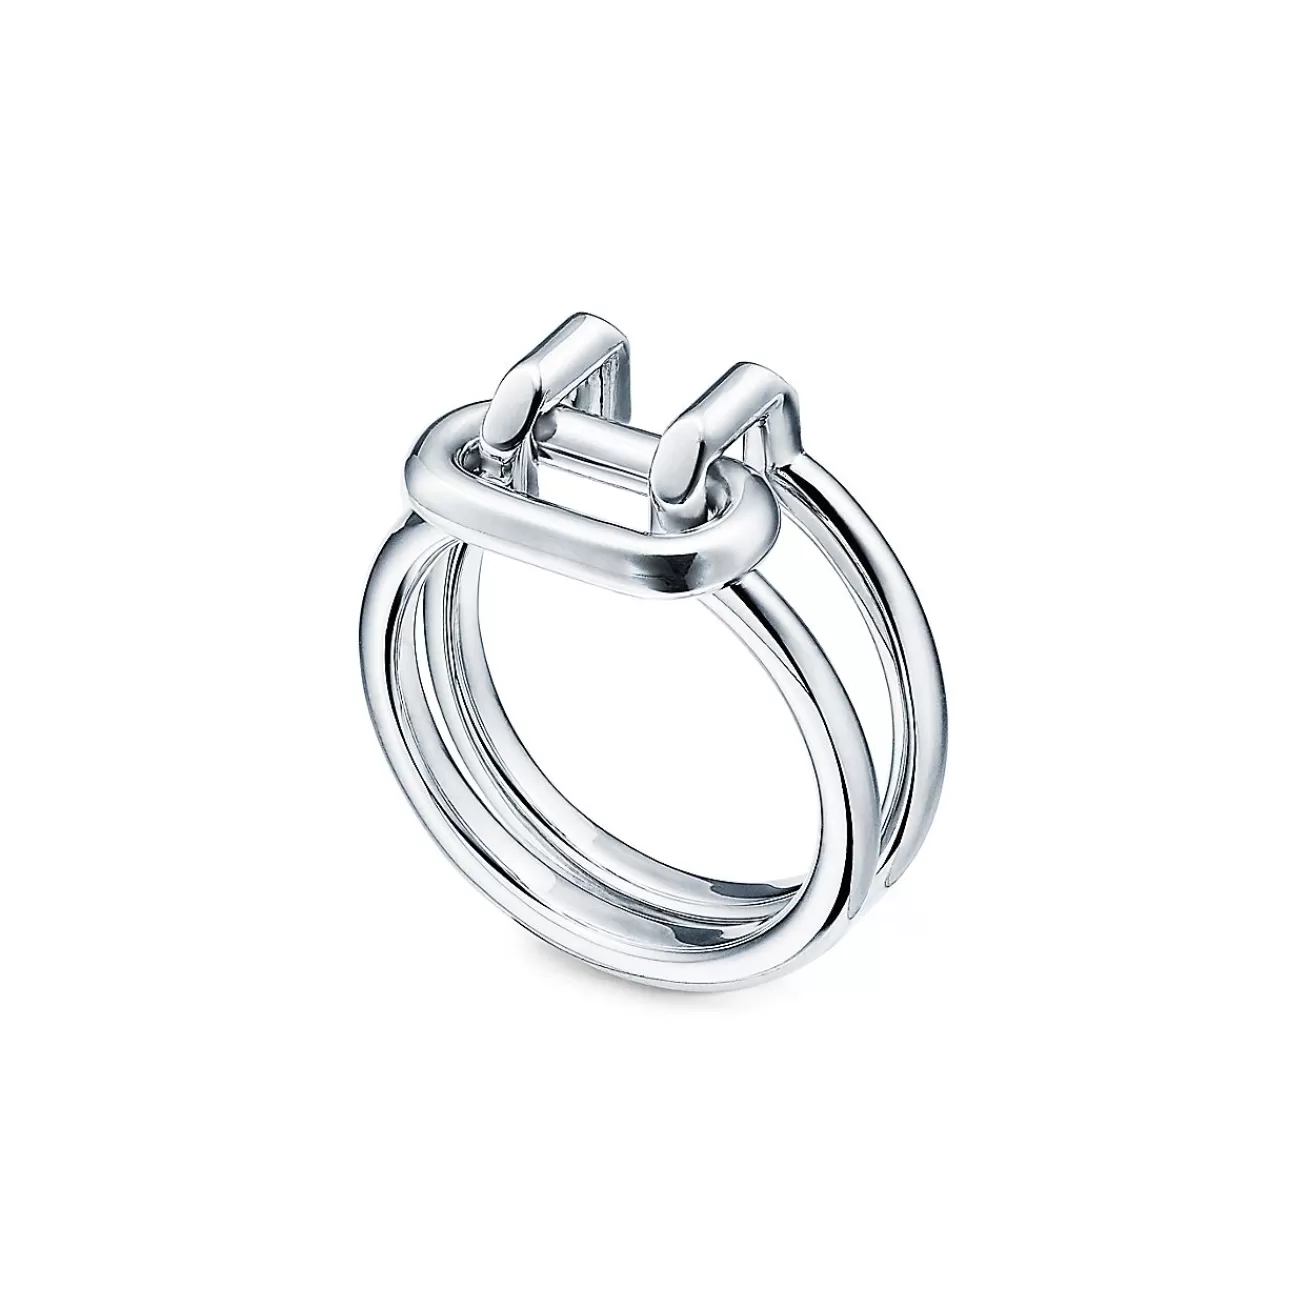 Tiffany & Co. Tiffany HardWear two-row ring in sterling silver. | ^ Rings | Bold Silver Jewelry